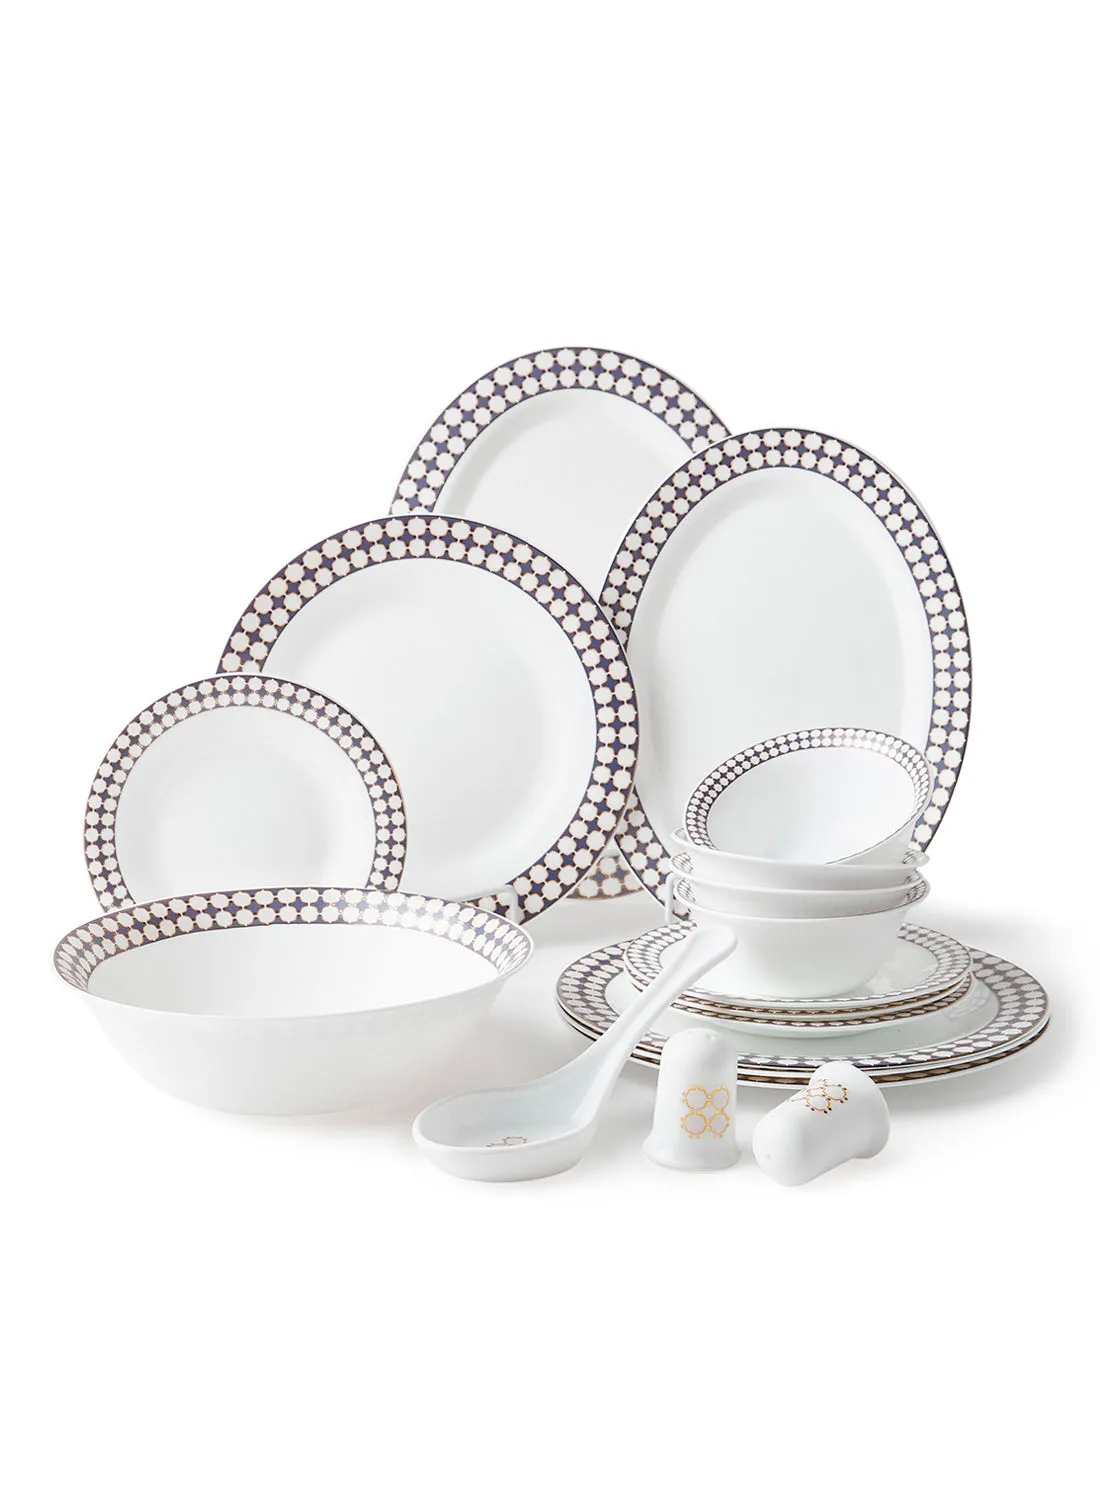 noon east 18 Piece Opalware Dinner Set - Light Weight Dishes, Plates - Dinner Plate, Side Plate, Bowl, Serving Dish And Bowl - Serves 4 - Festive Design Lattice Gold